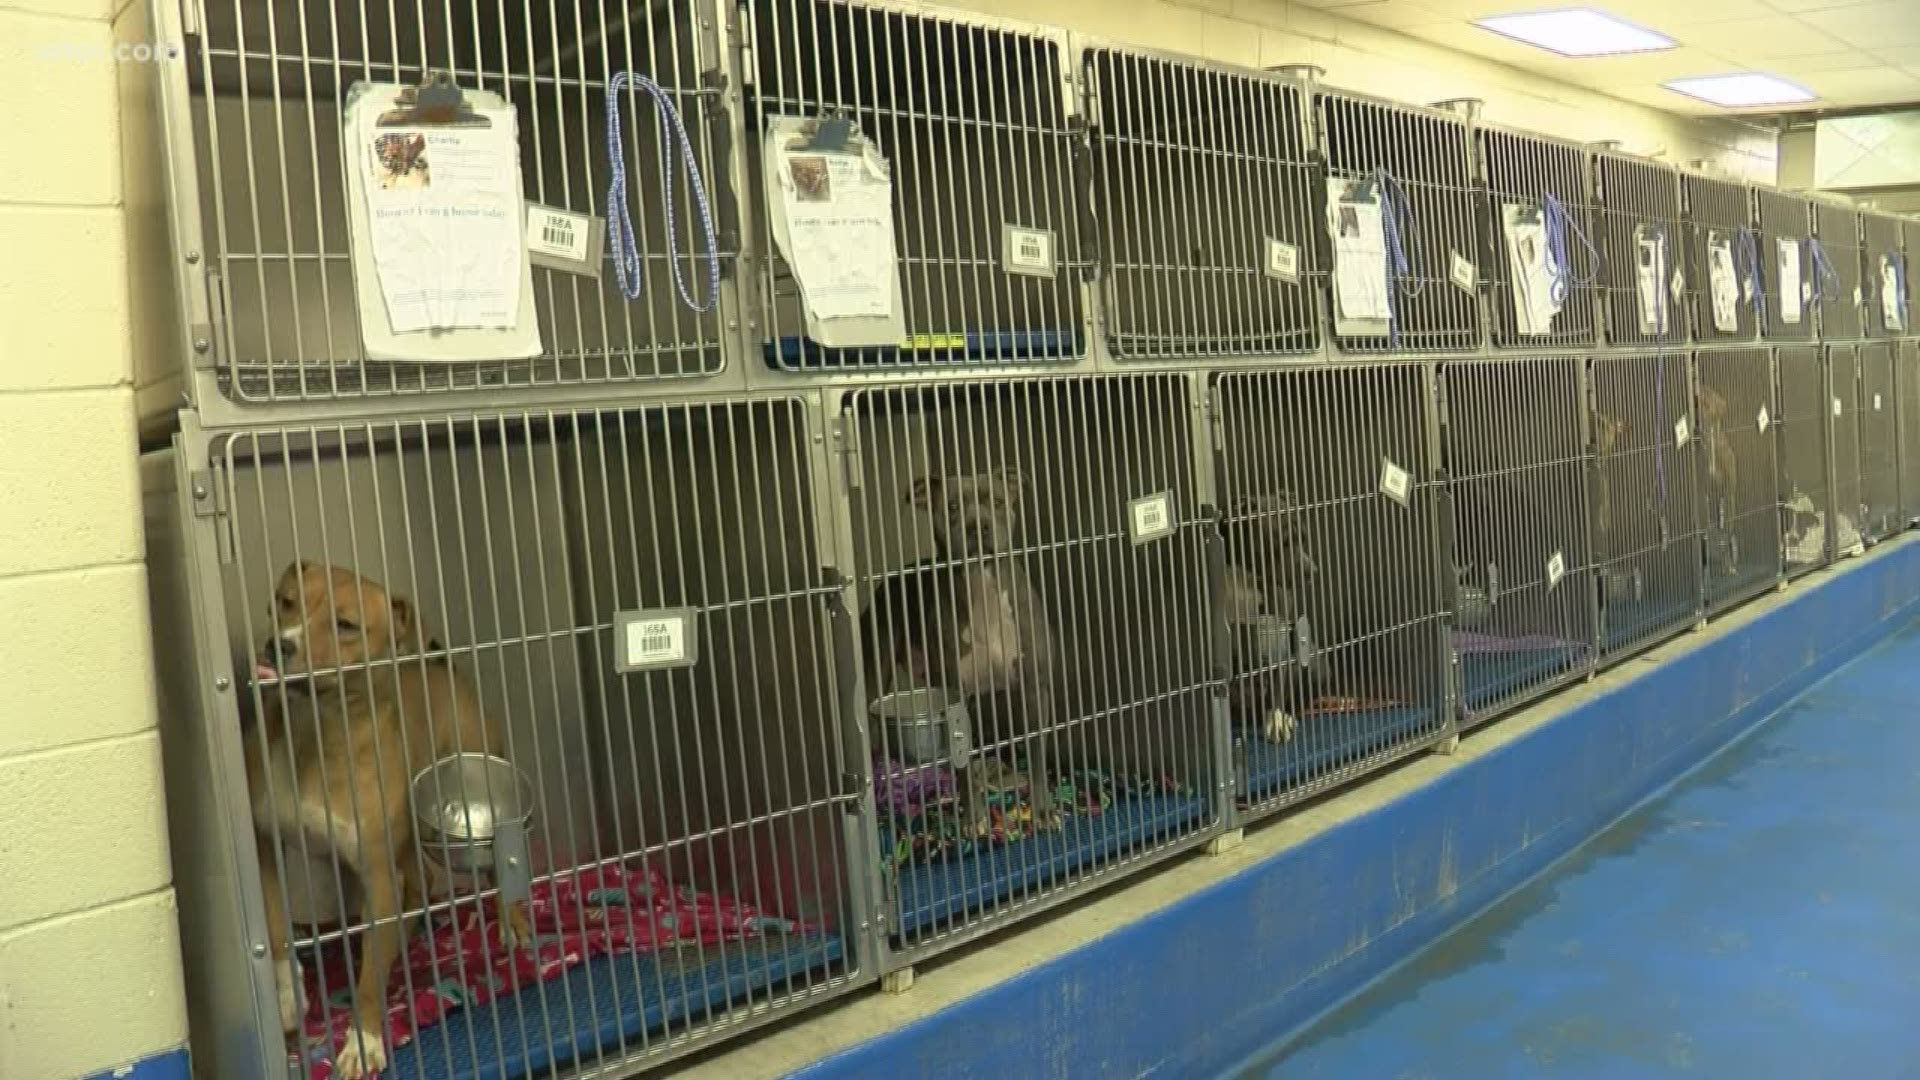 The Lucas County commissioners approved a request to allow advertisement for construction services for the new canine care and control facility.